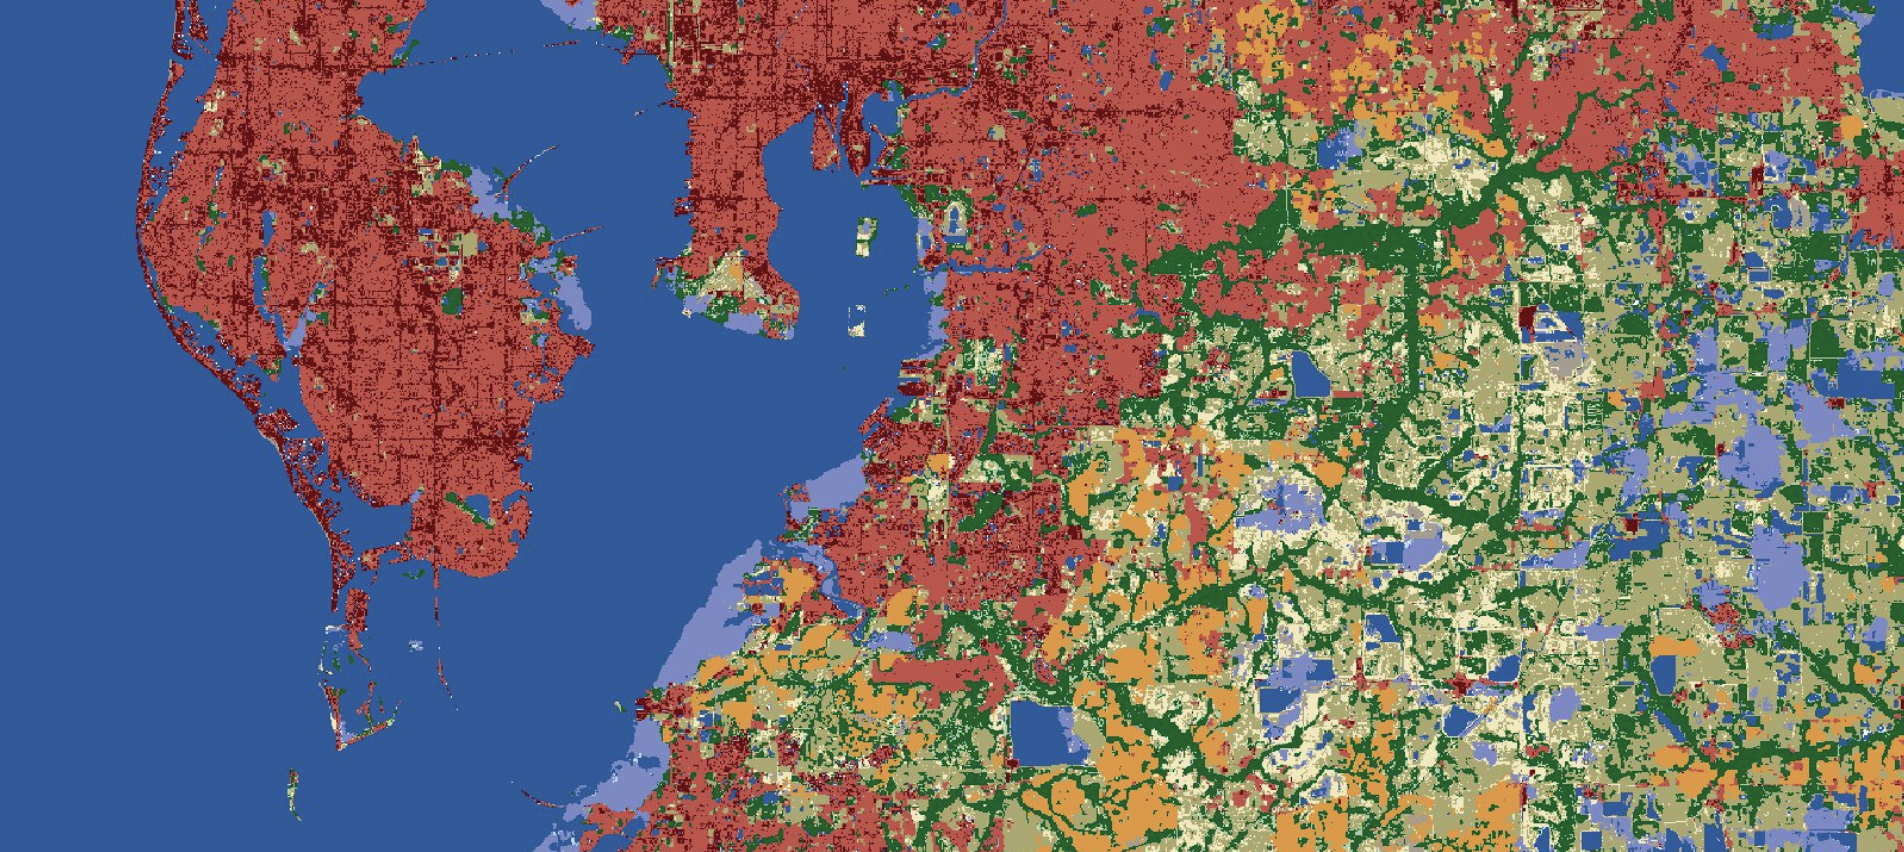 This is a sample image of 10m land cover over the Tampa Bay
area in Florida.